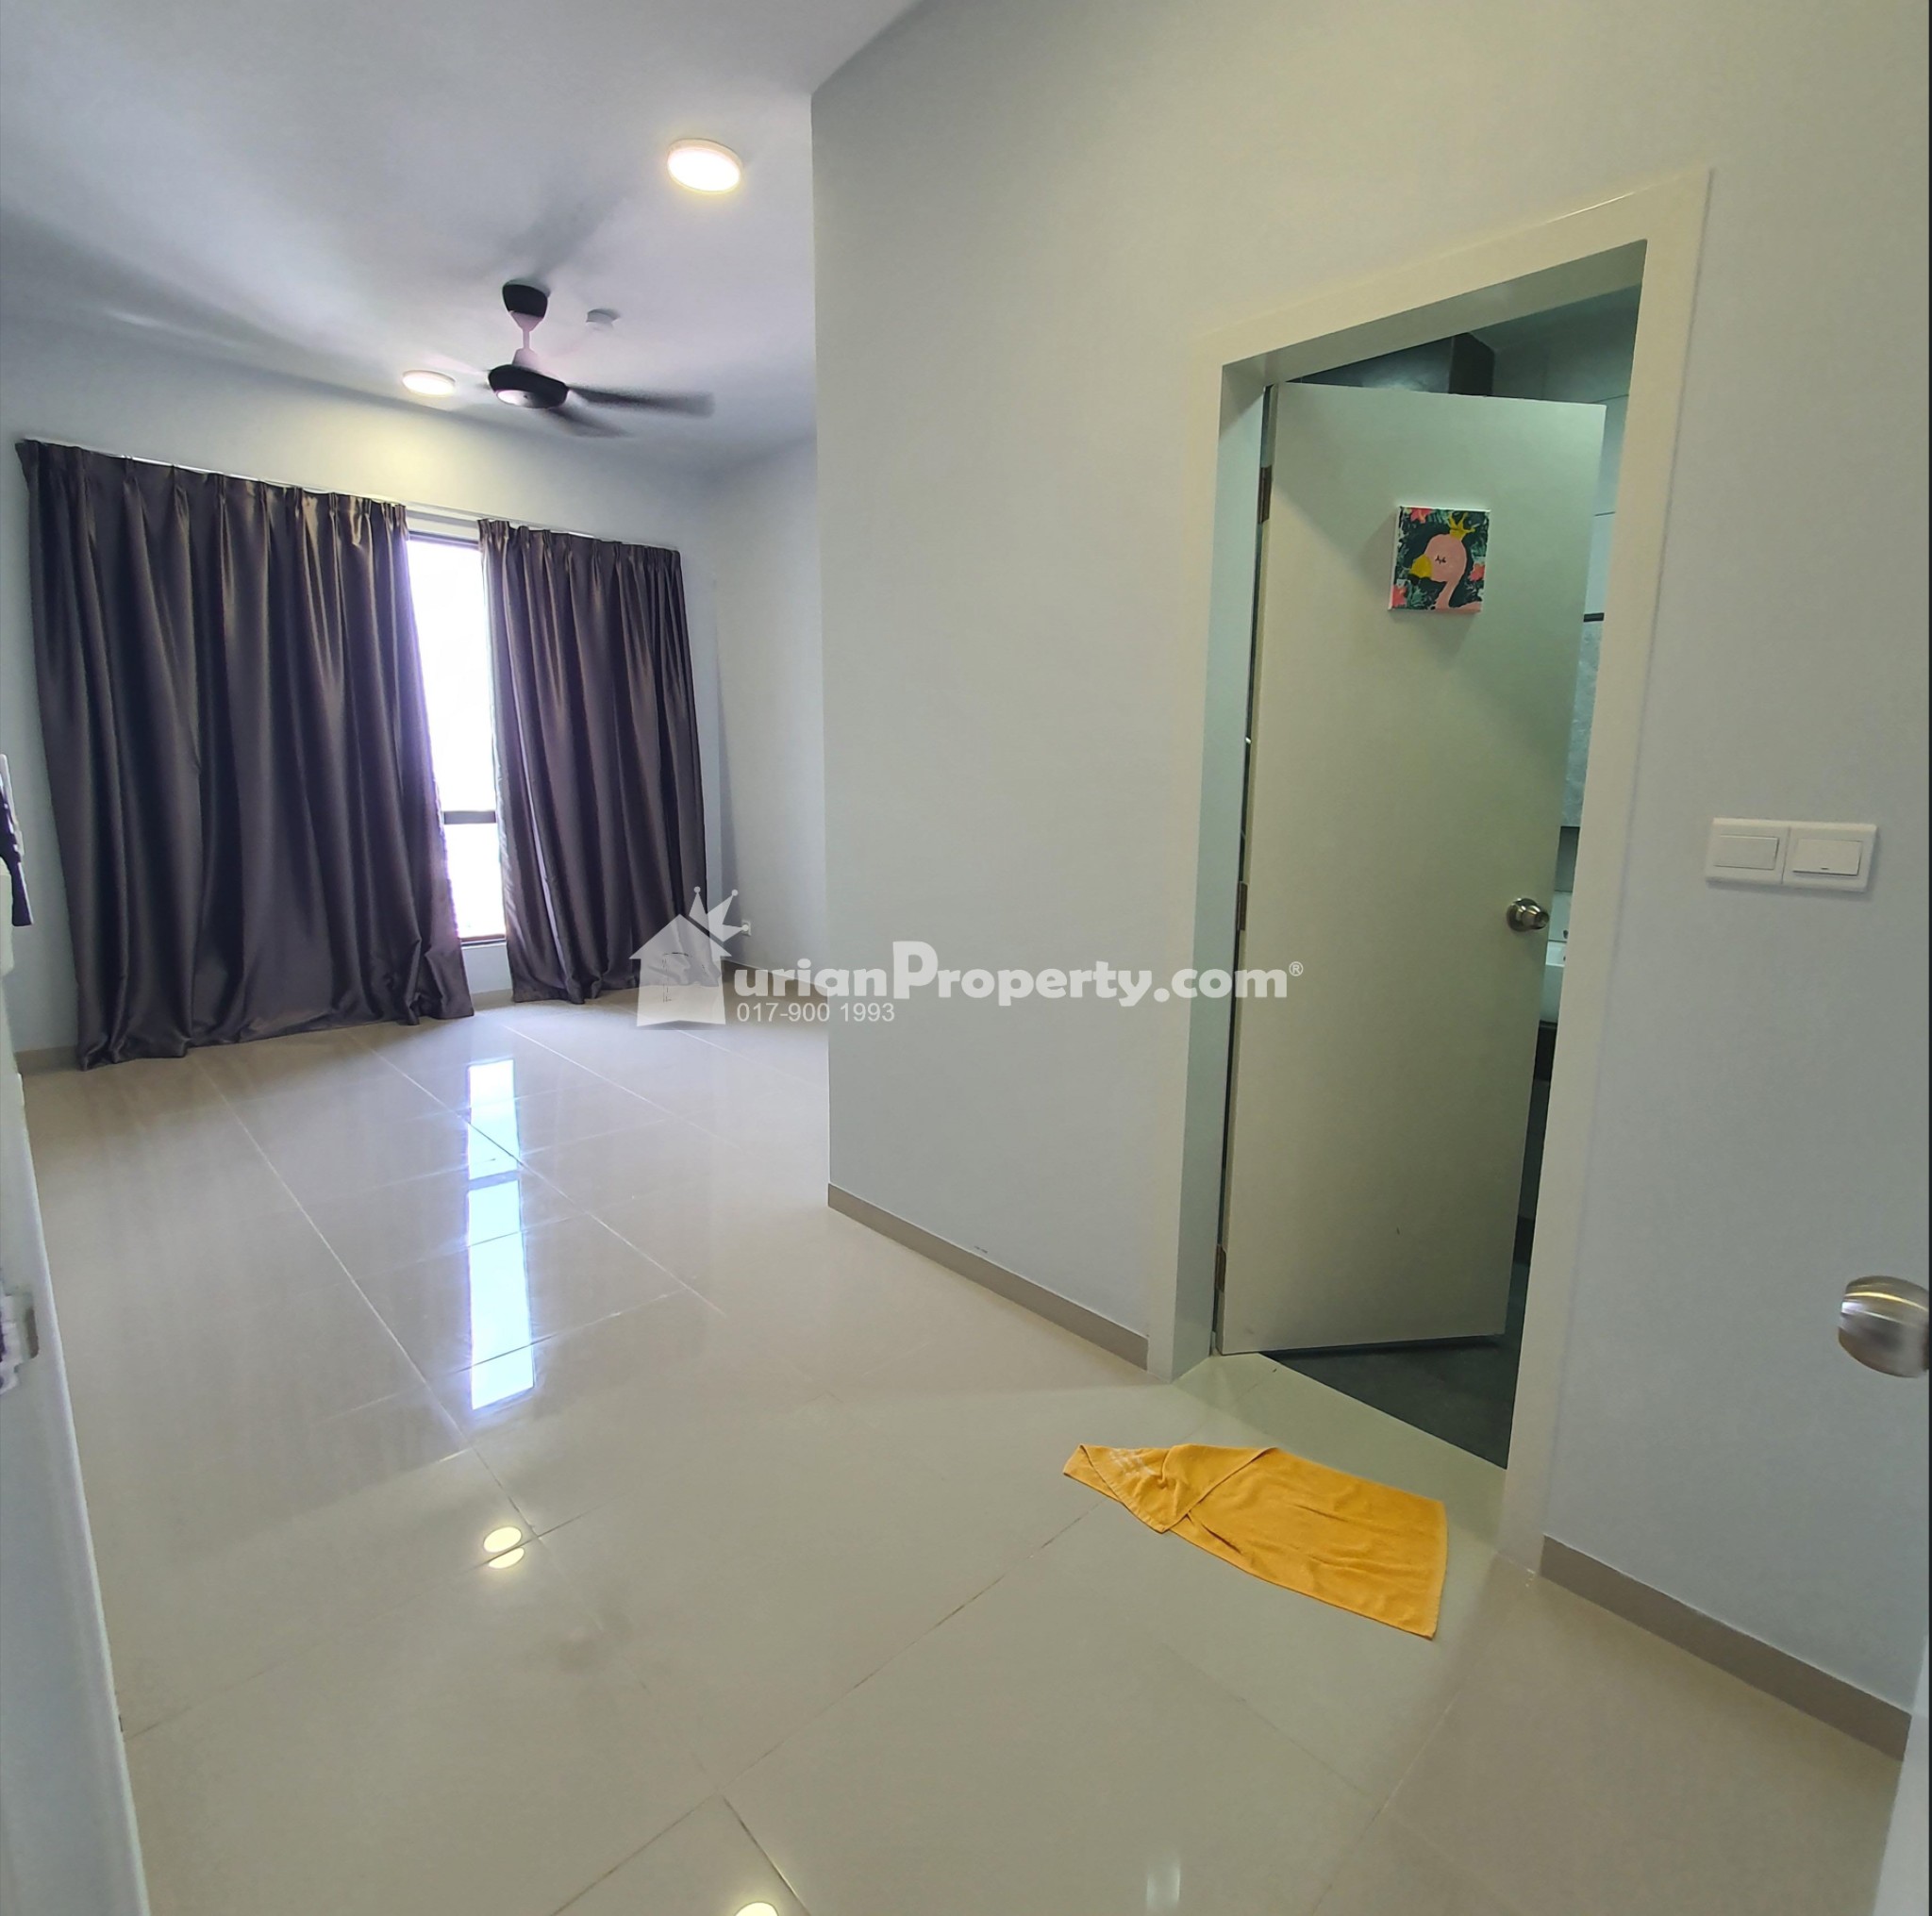 Condo For Rent at Amani Residences